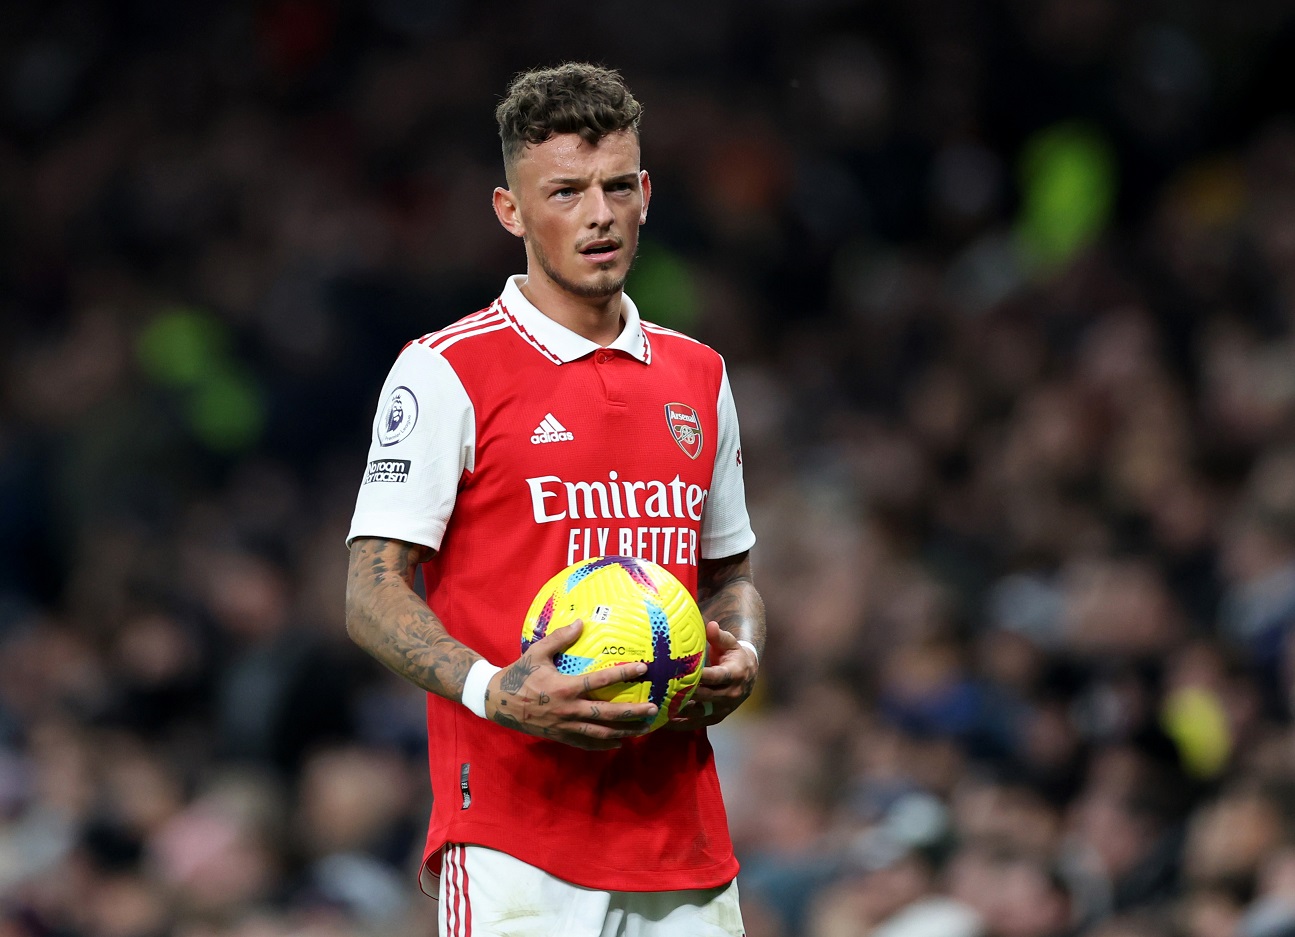 tottenham hotspur v arsenal fc premier league 1 1 | Brazil’s coach ignores Arsenal stars in latest call up | The Paradise